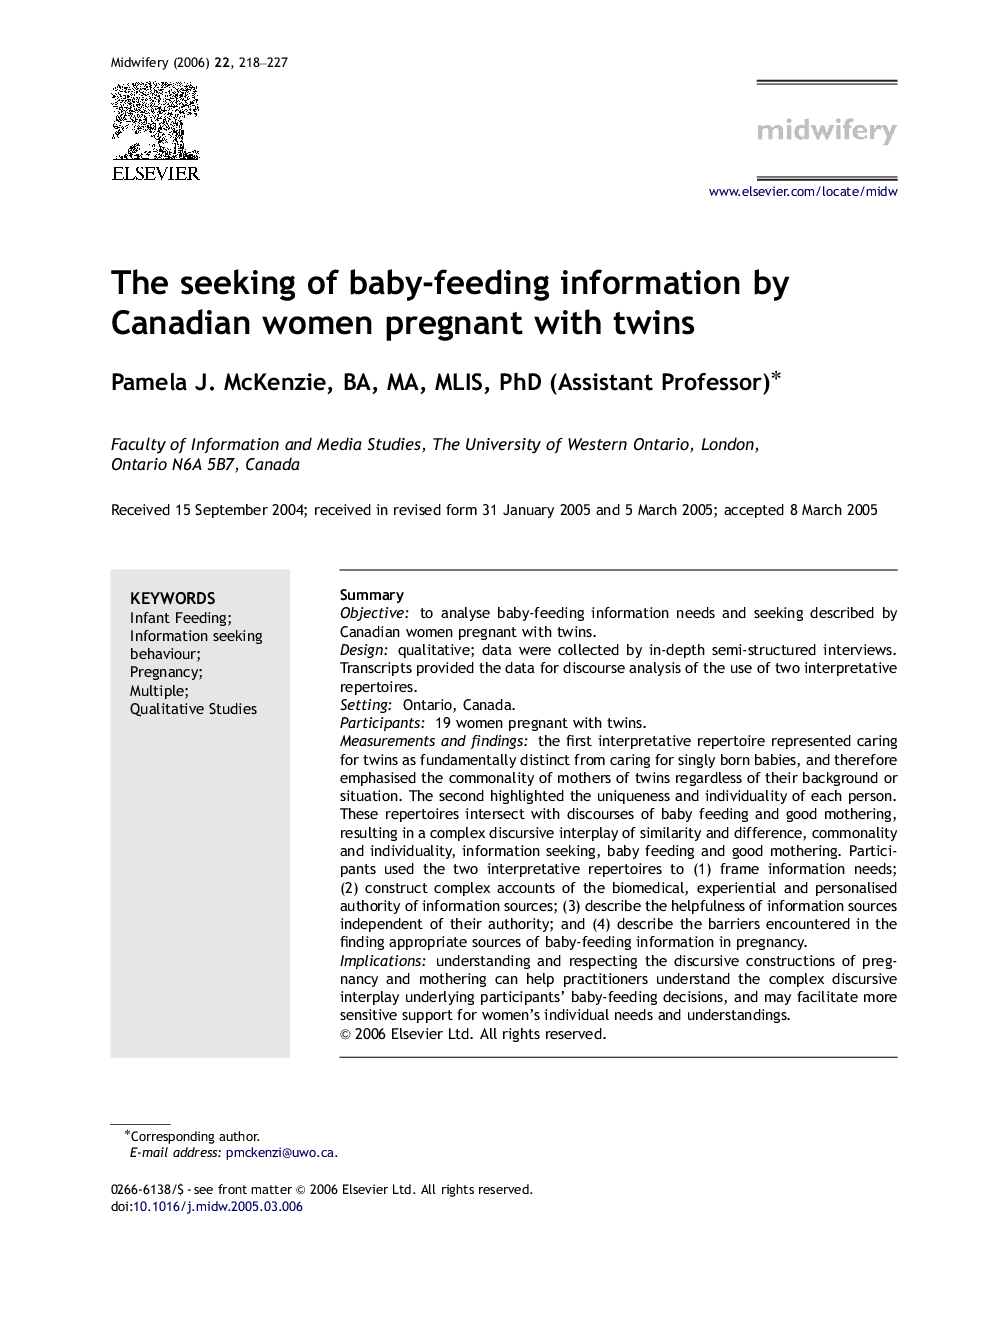 The seeking of baby-feeding information by Canadian women pregnant with twins